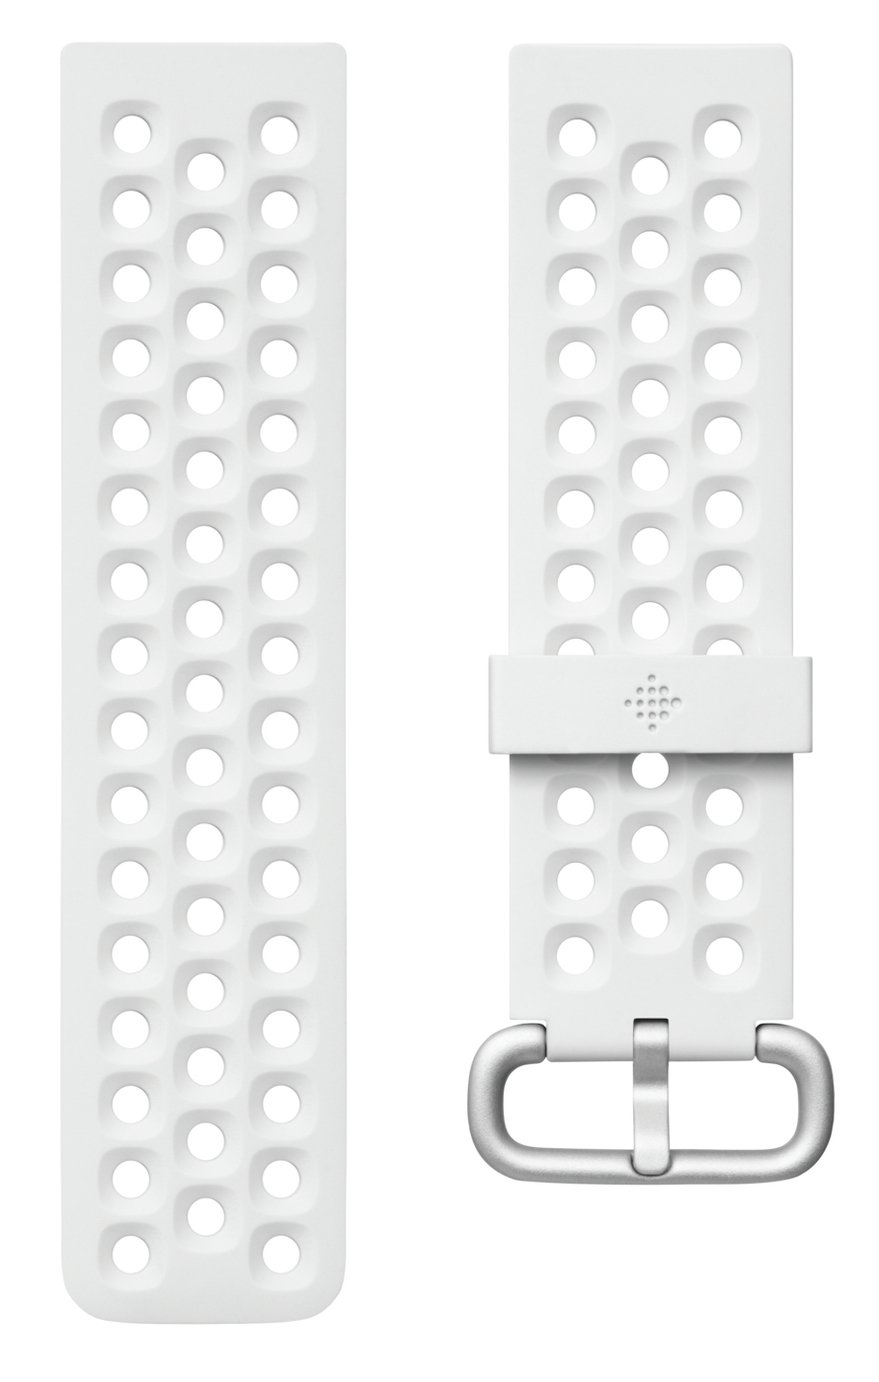 Results for fitbit strap